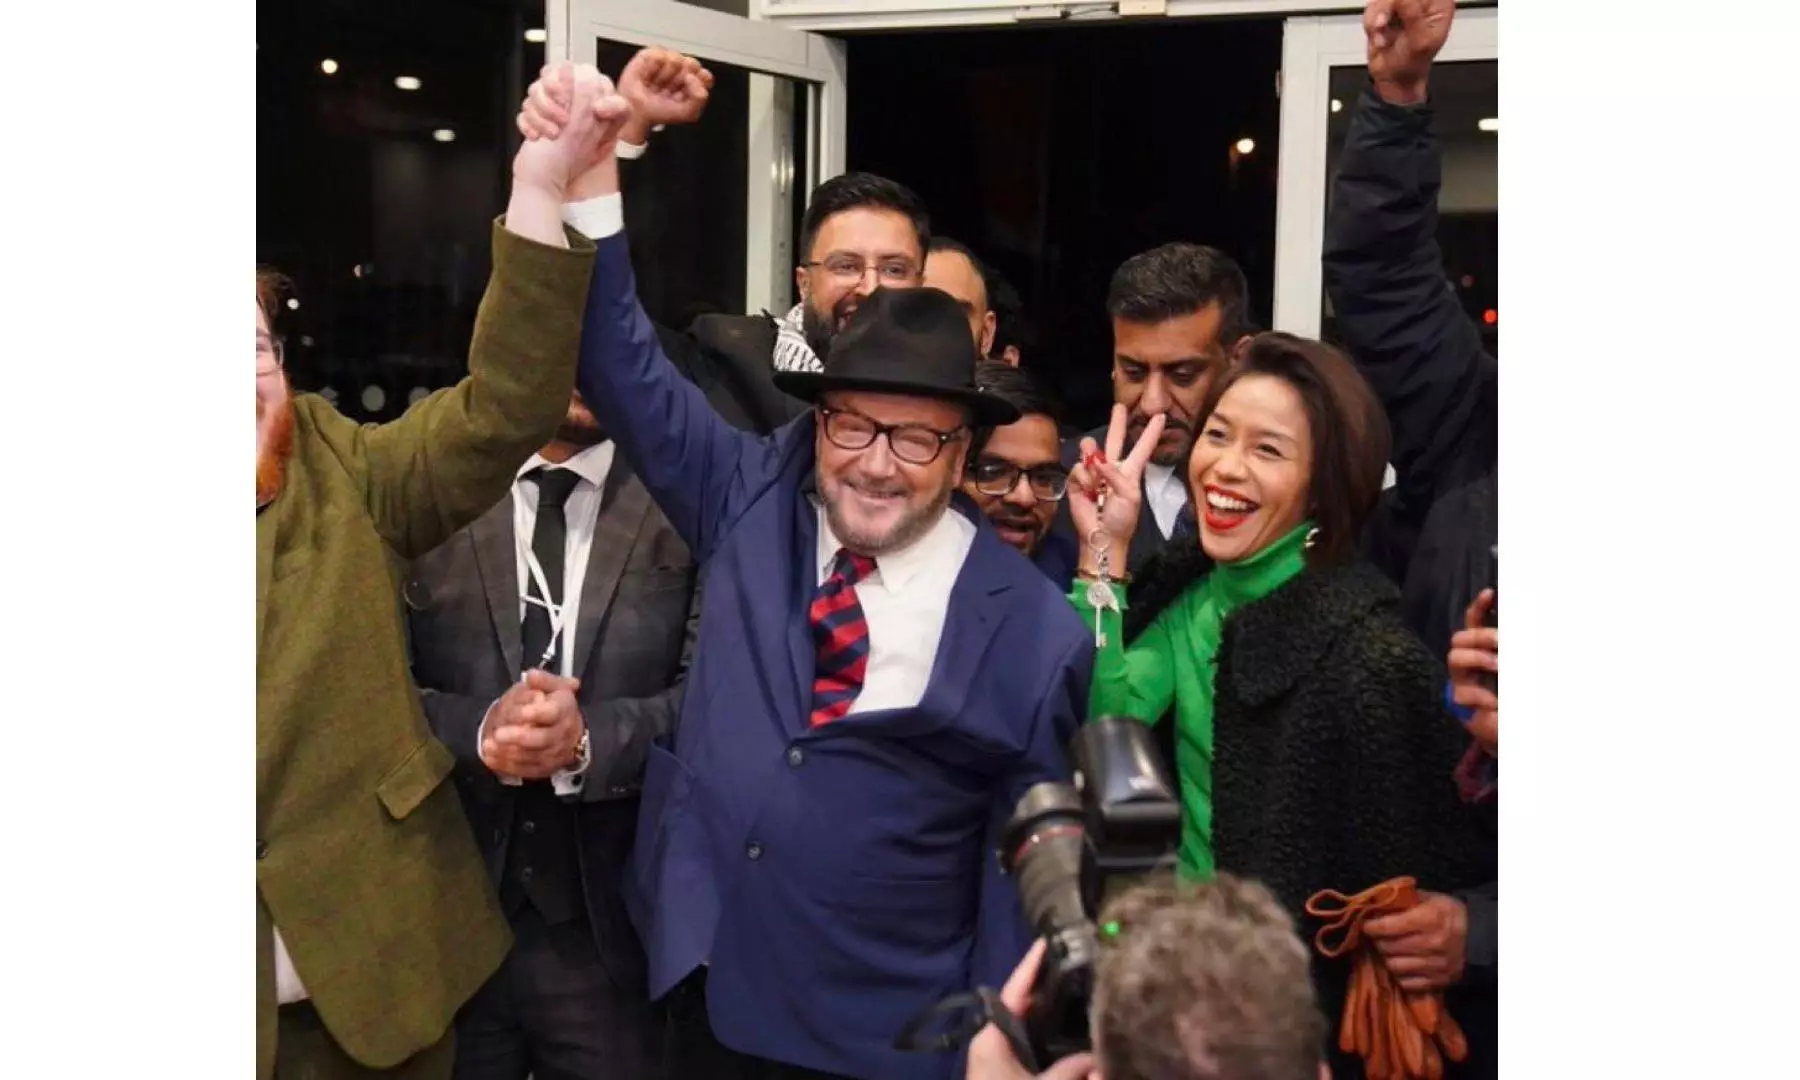 Farrukh Dhondy | How Galloway won UK byelection with his Israel-bashing; put Labour in a fix